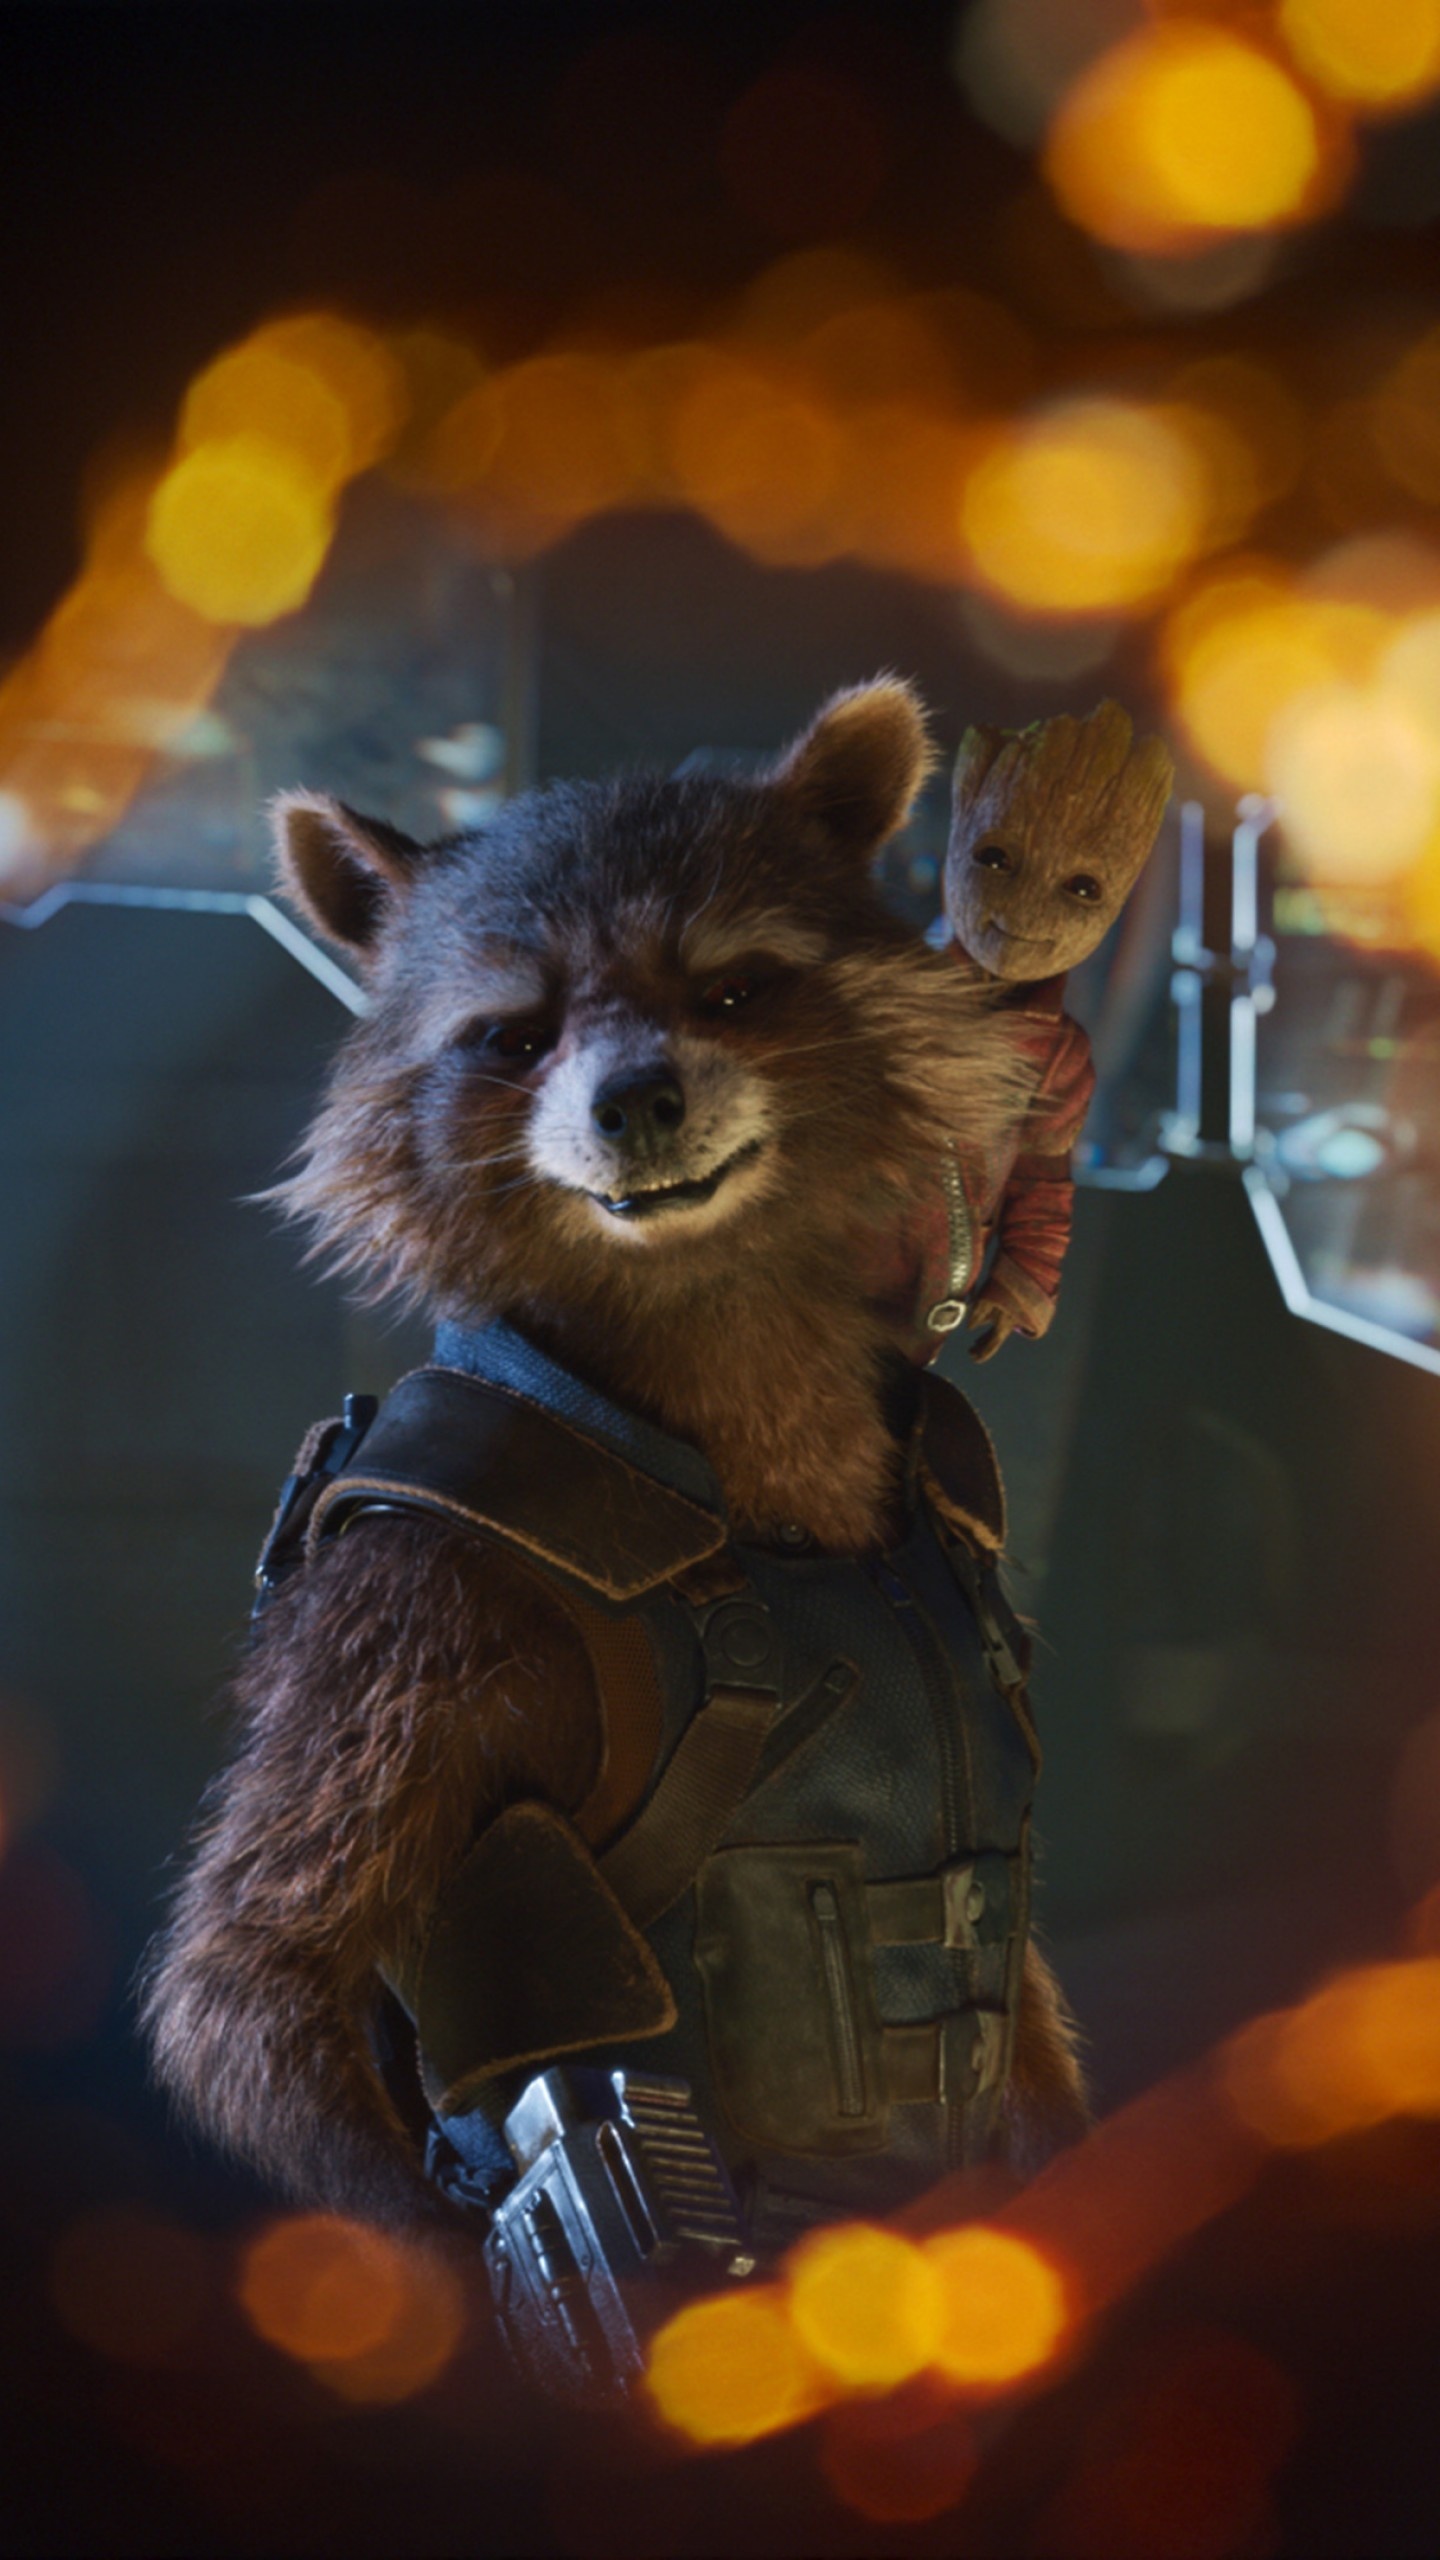 Guardians of the Galaxy Vol 2, Baby Groot and Rocket, 4K movie wallpaper, 1440x2560 HD Handy